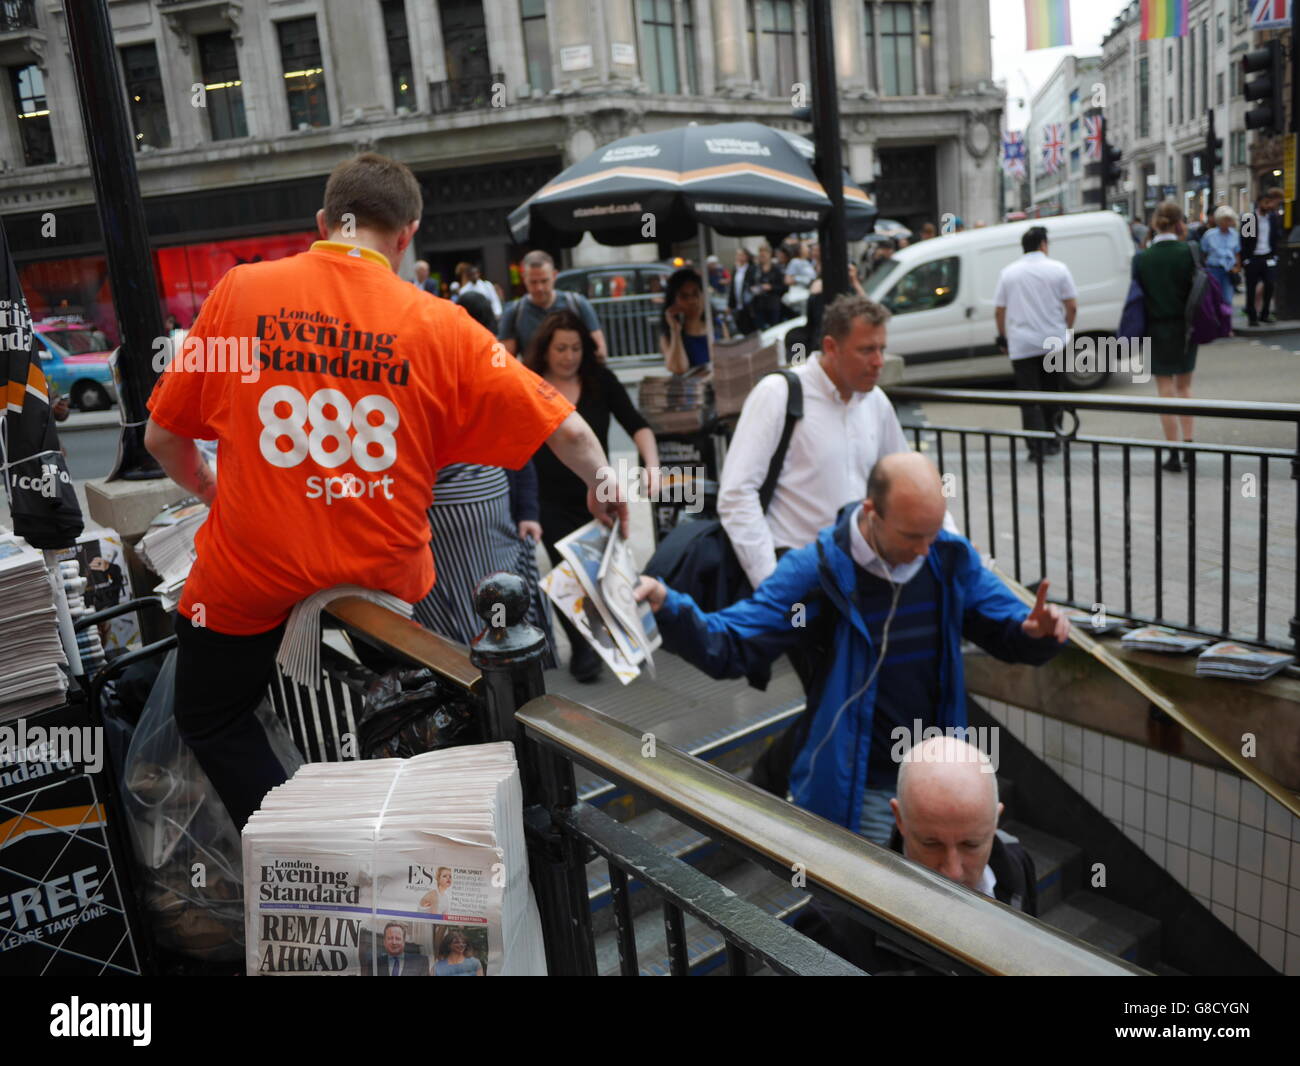 Evening Standard newspaper distributor with 888 sport T-shirt Oxford Street London, with remain ahead headline prior to brexit Stock Photo